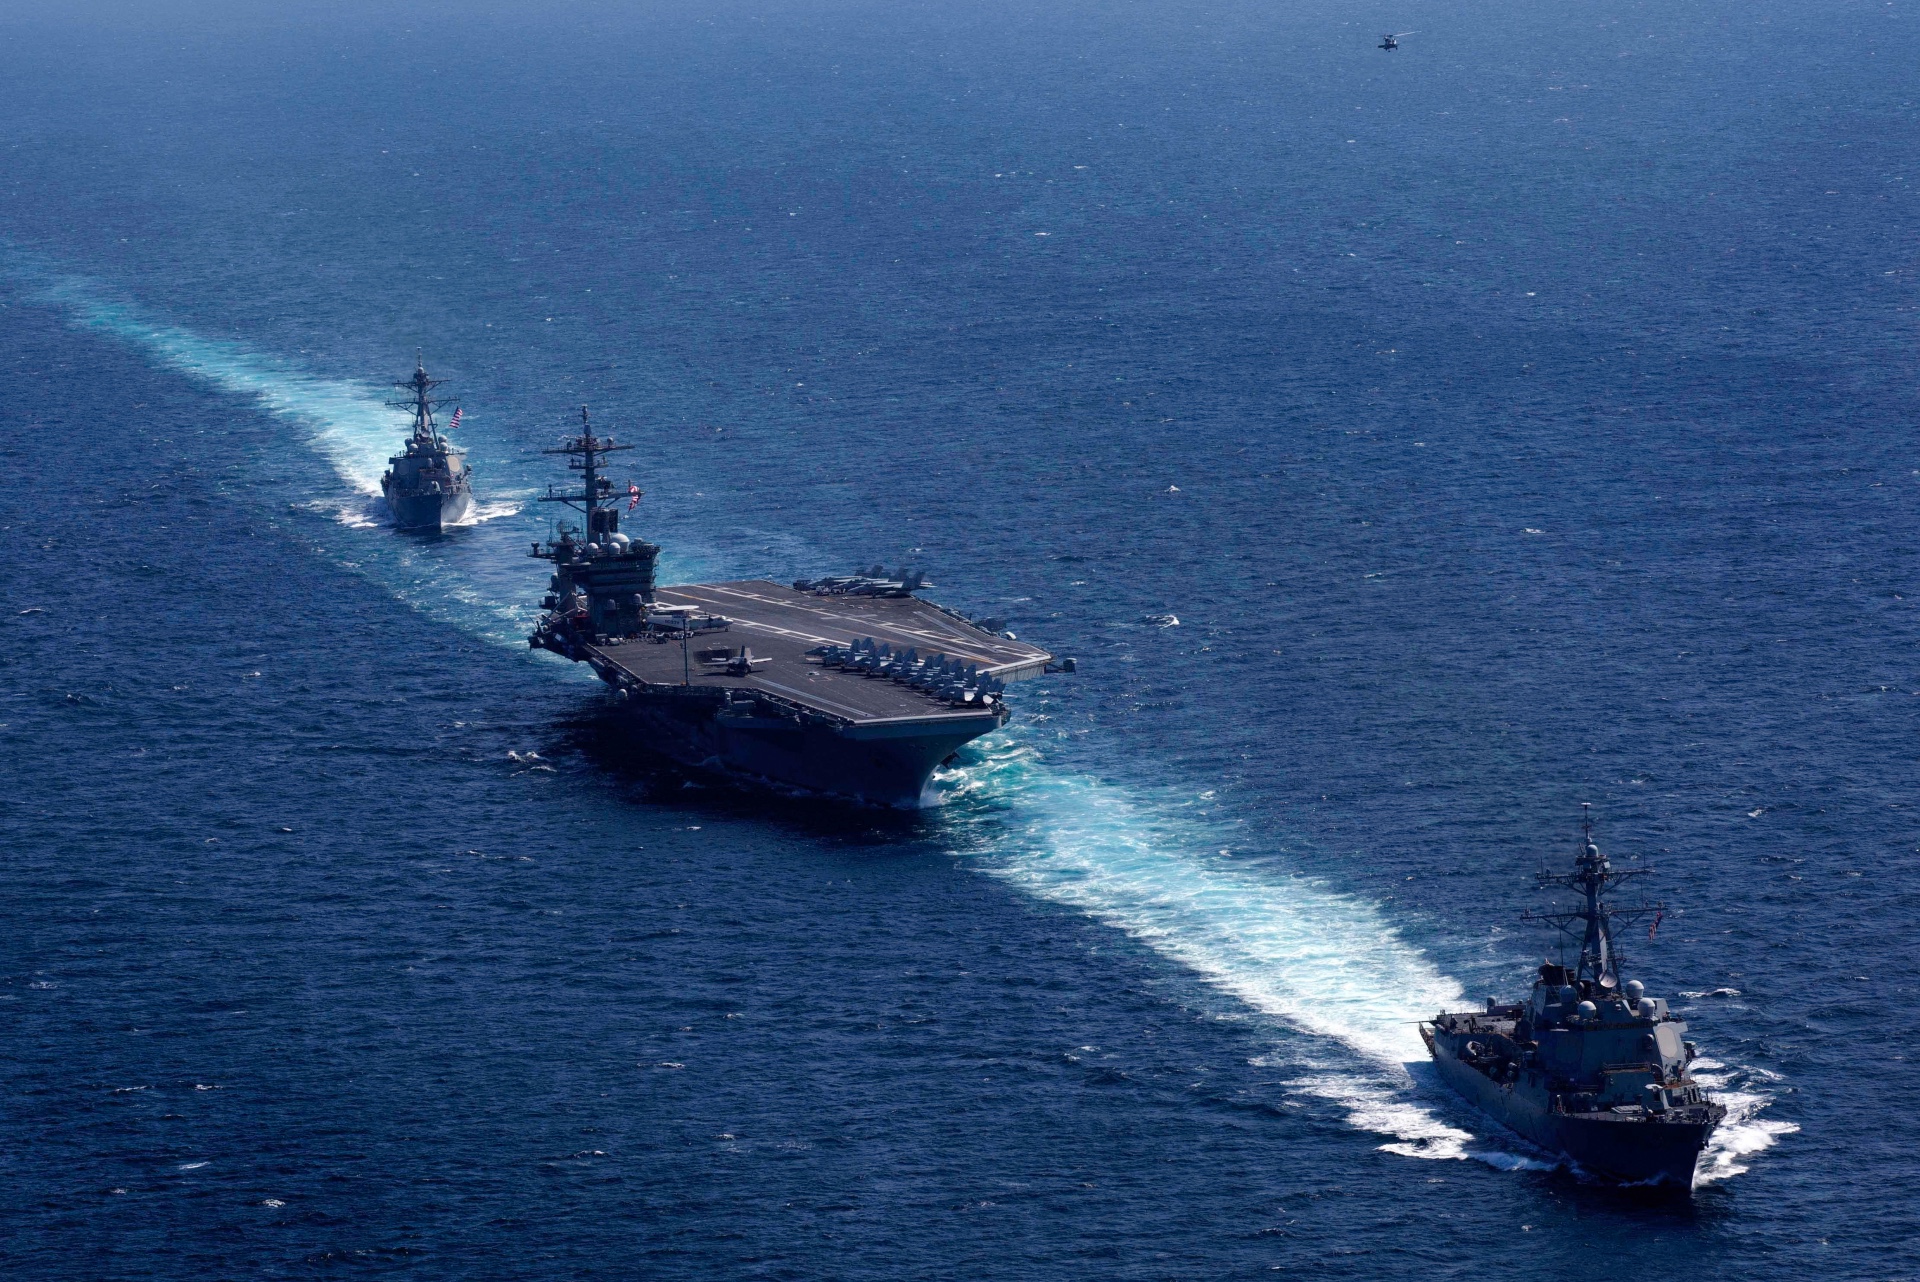 The Nimitz-class aircraft carrier USS Abraham Lincoln (CVN 72); the Arleigh Burke-class guided-missile destroyer USS Mason (DDG 87) from Destroyer Squadron 2; and the Arleigh Burke-class guided-missile destroyer USS Forrest Sherman (DDG 98) from Destroyer Squadron 28 transit the Atlantic Ocean.